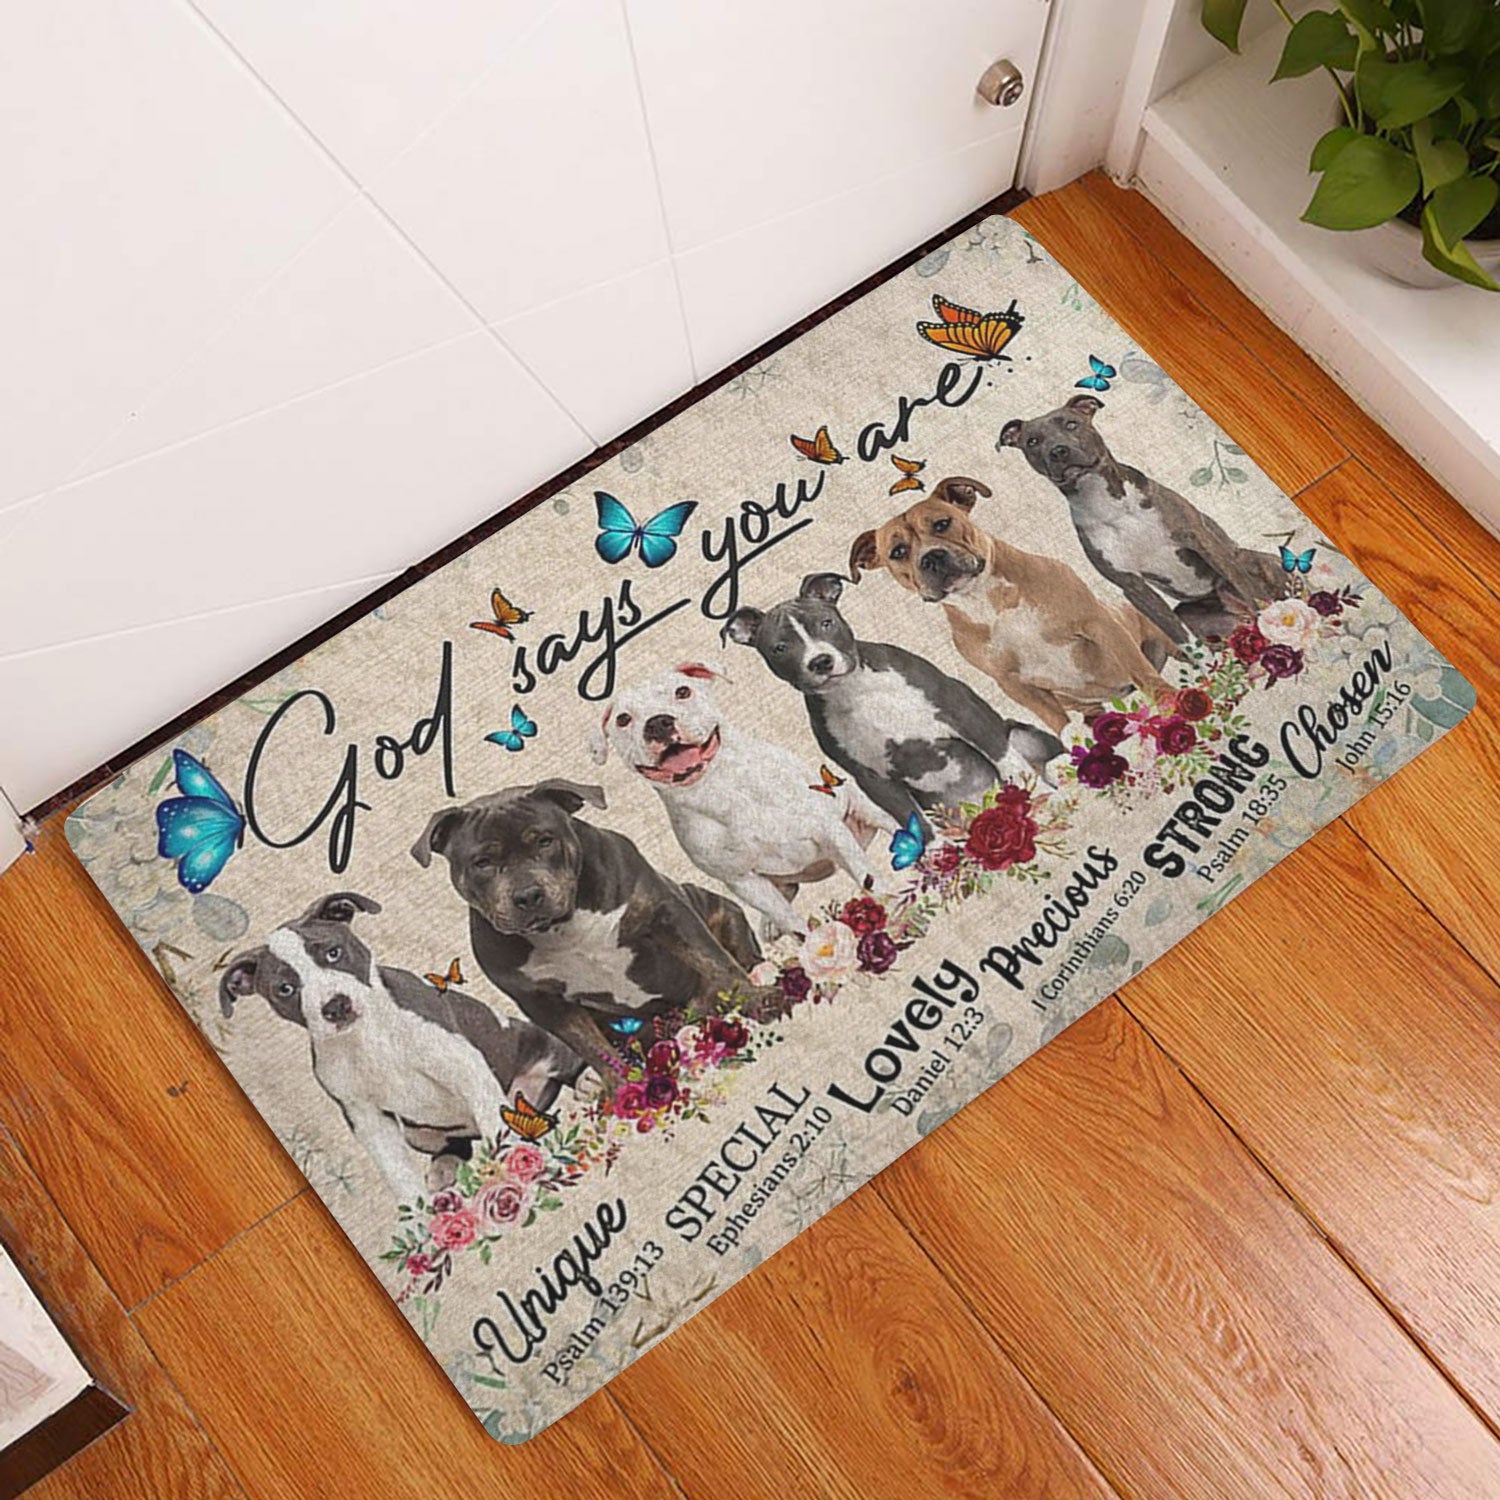 Ohaprints-Doormat-Outdoor-Indoor-Pitbulls-Dog-God-Says-You-Are-Unique-Gifts-For-Dog-Lover-Rubber-Door-Mat-1301-